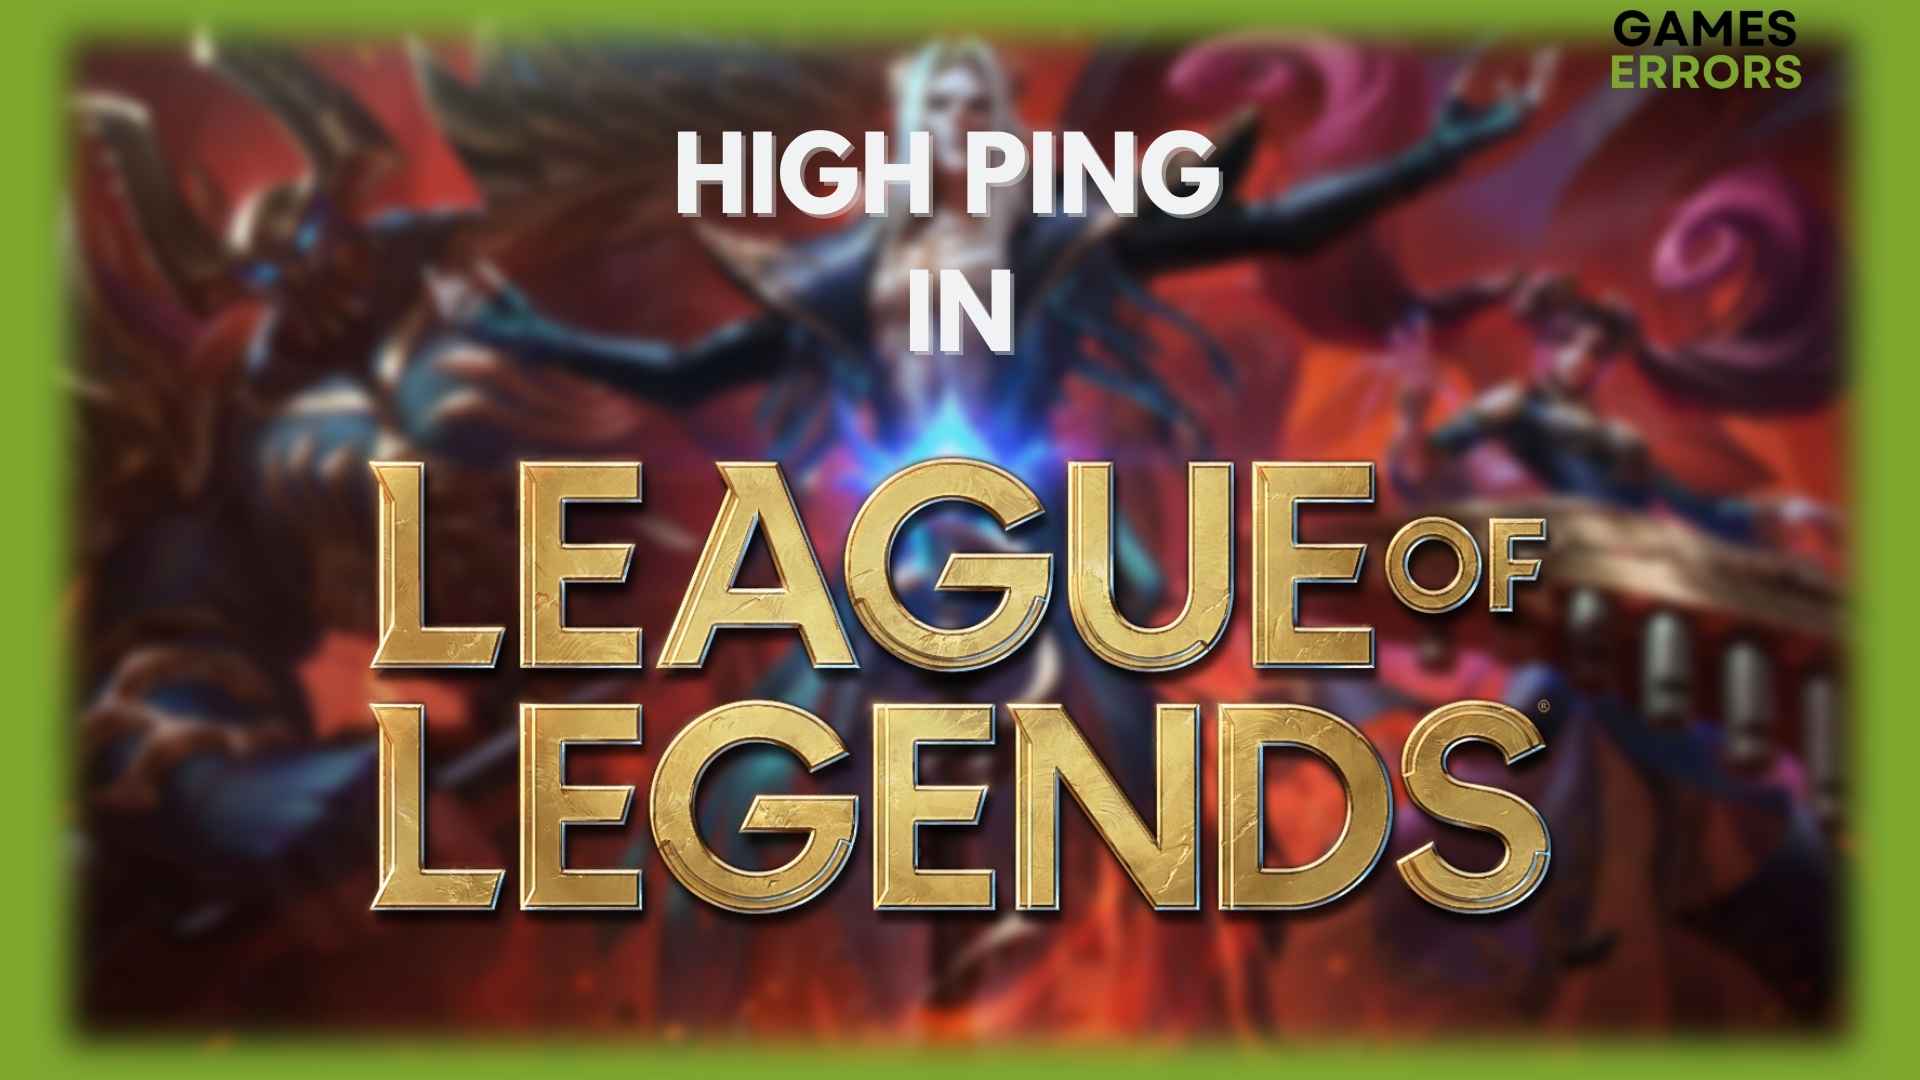 If all else fails, reach out to your Internet Service Provider (ISP) for assistance.
Explain the high ping issue in League of Legends and ask if there are any network-related problems on their end.